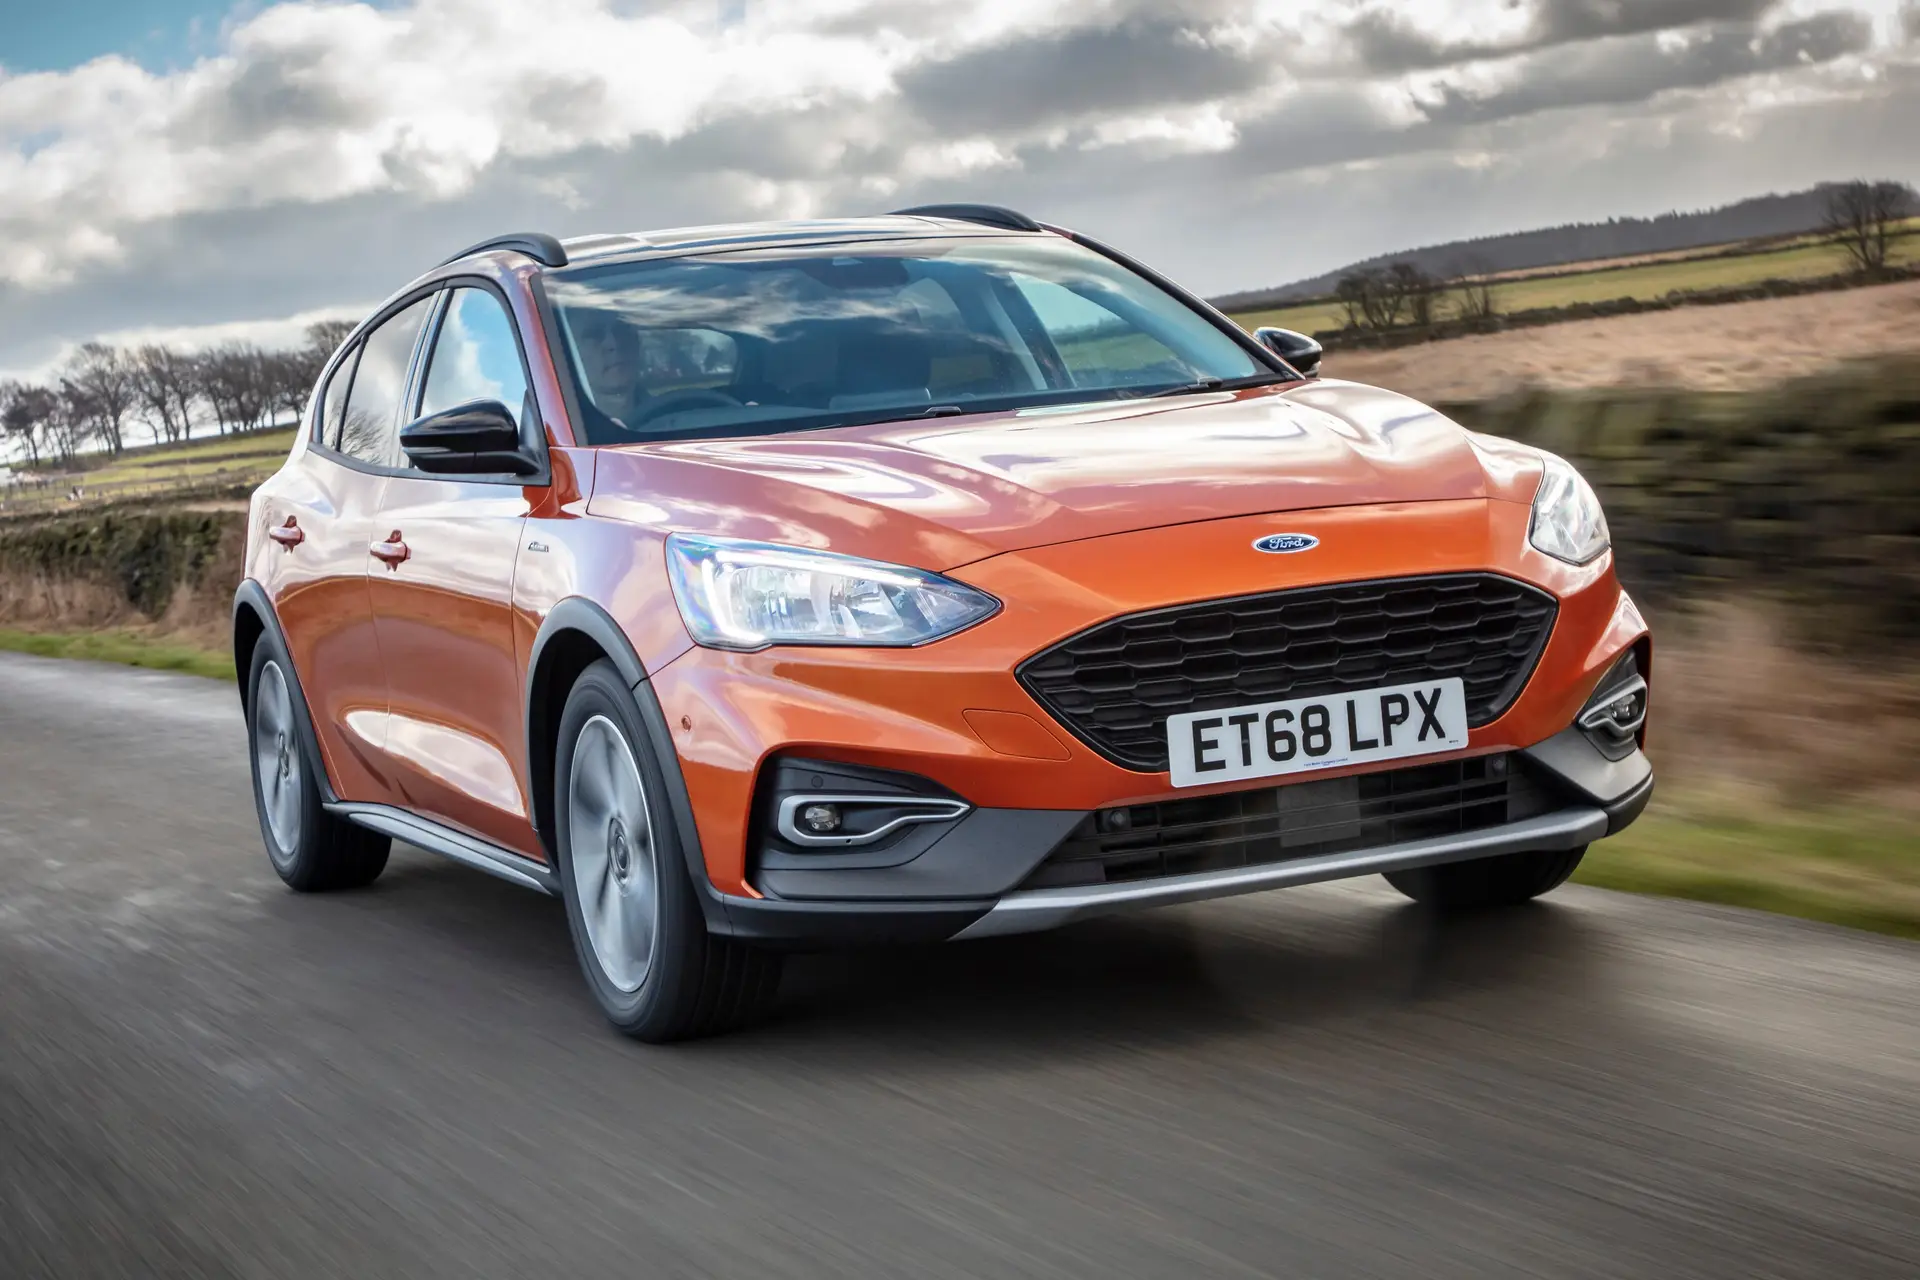 Ford Focus Active (2019) - pictures, information & specs